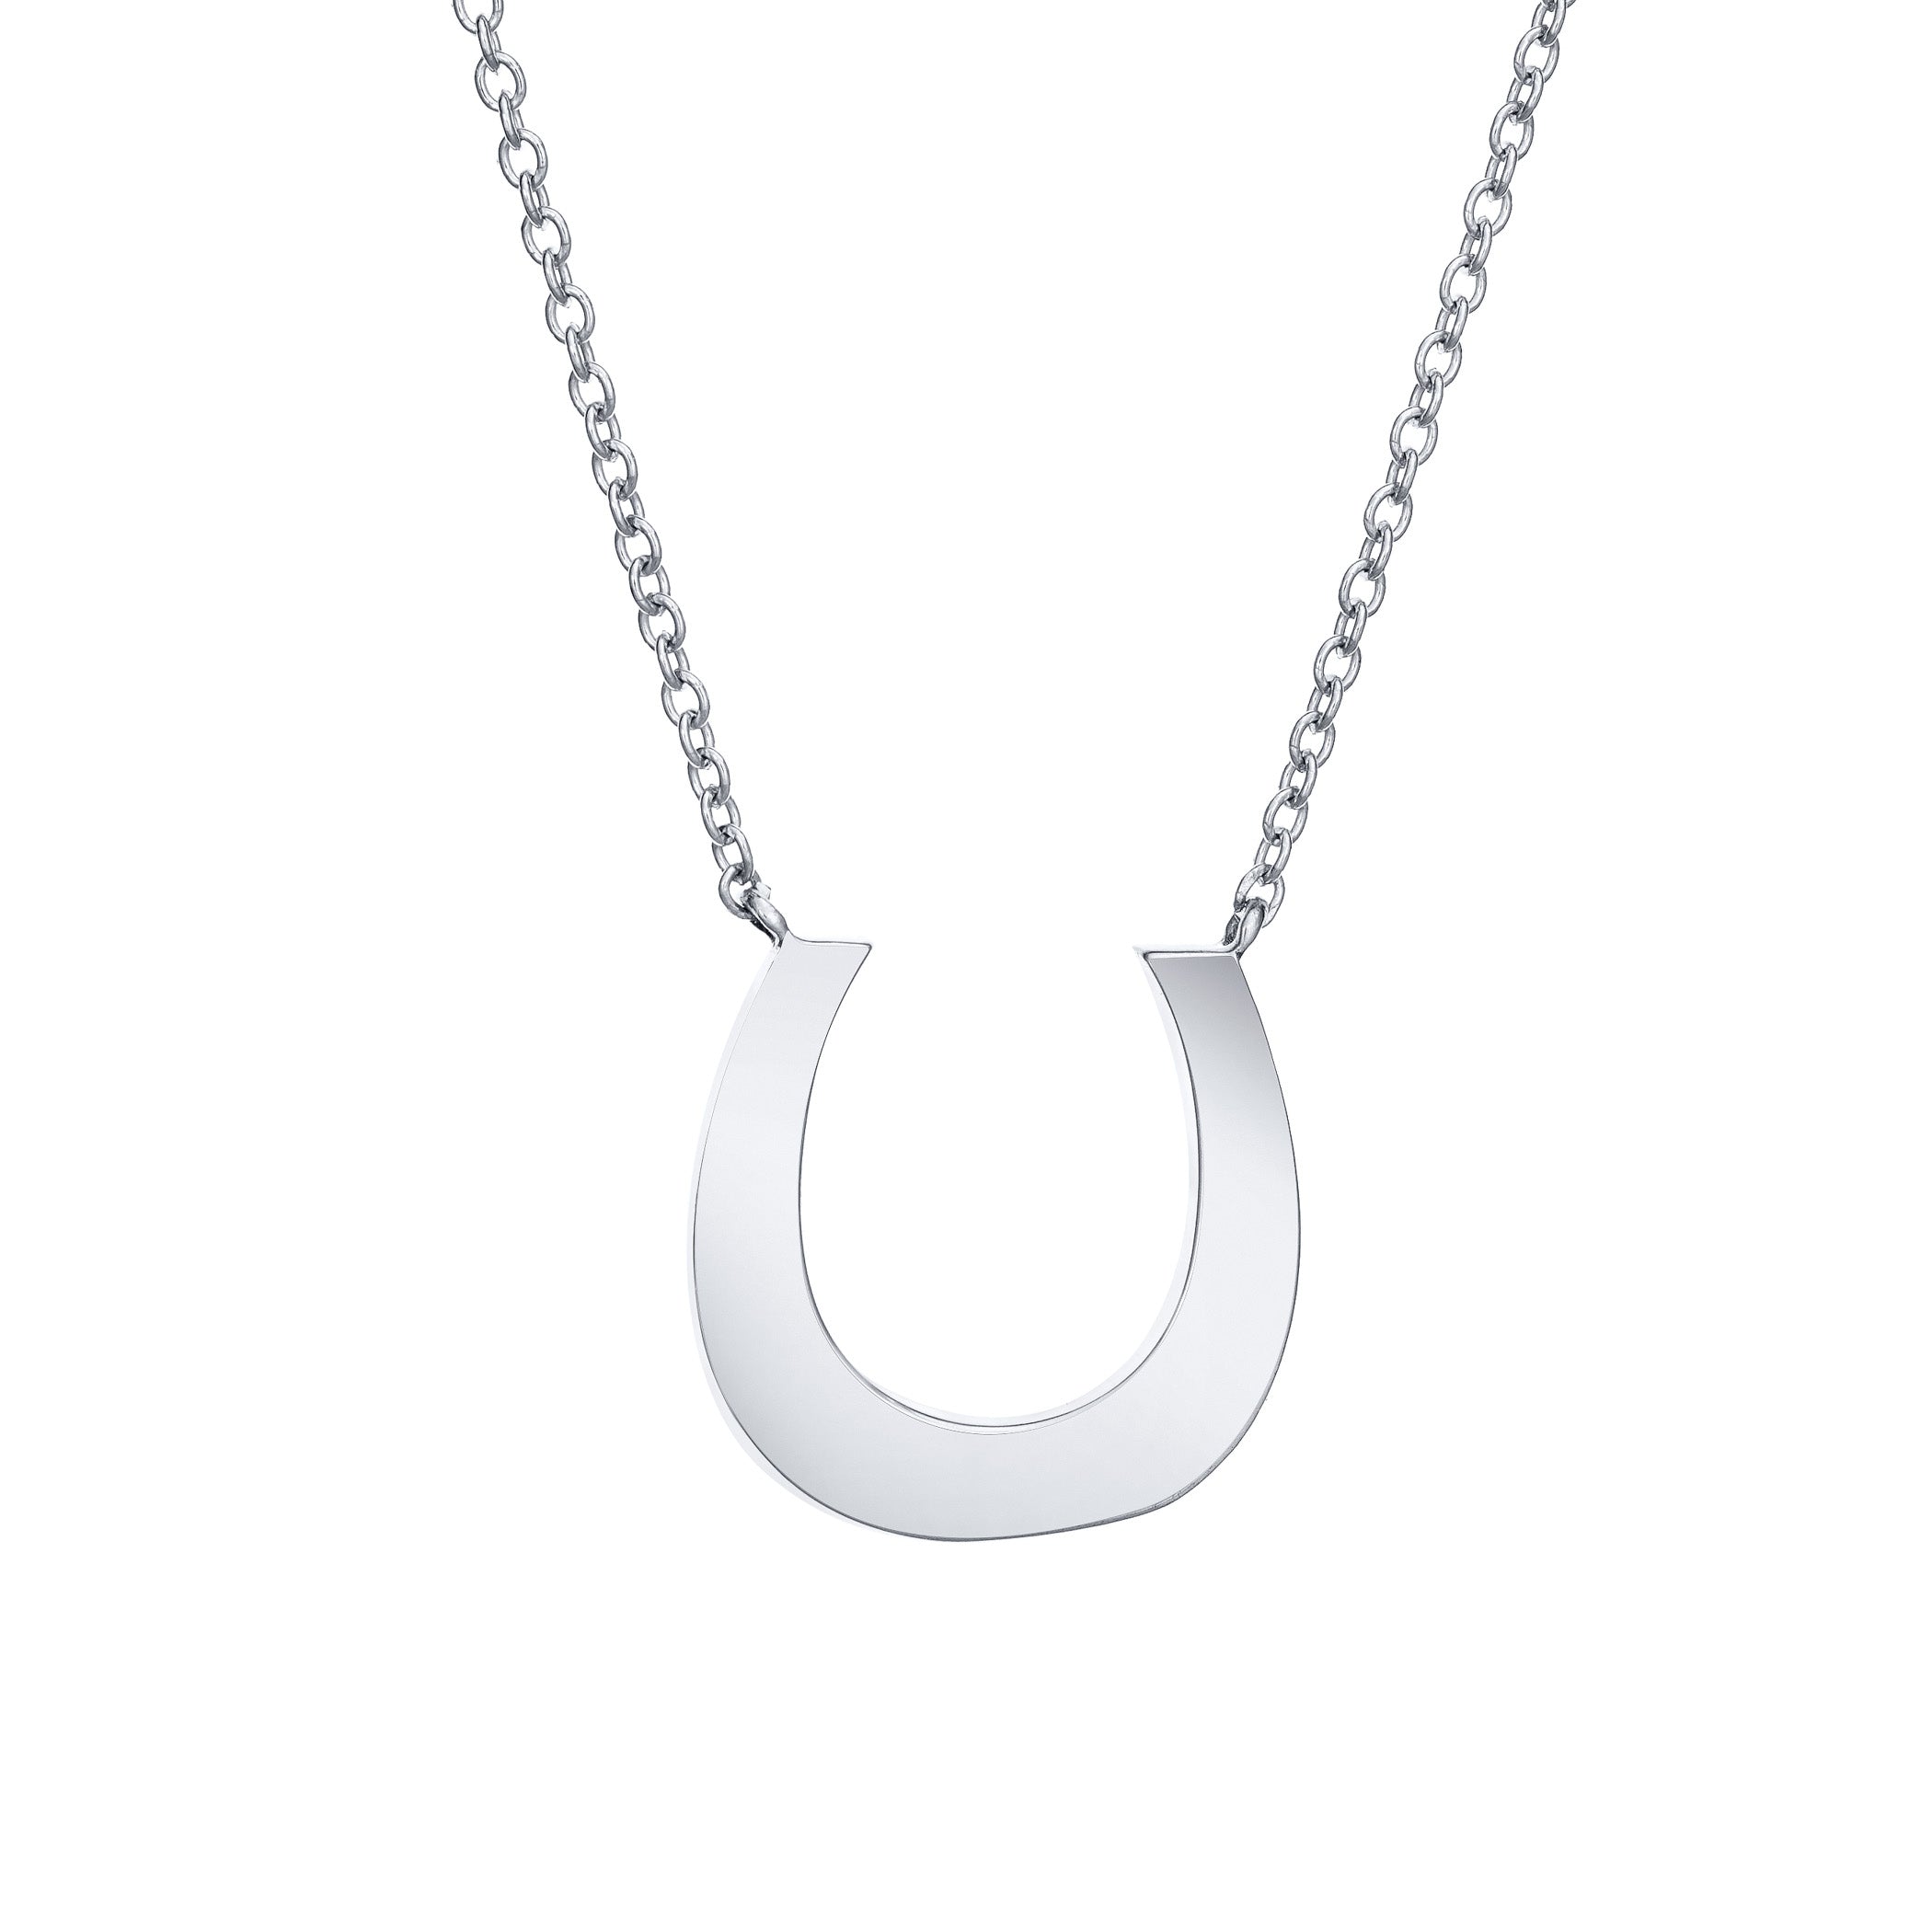 14K Gold] Horseshoe Necklace *Made-to-order*(KN0002) – Maxi Hawaiian  Jewelry マキシ ハワイアンジュエリー ハワイ本店